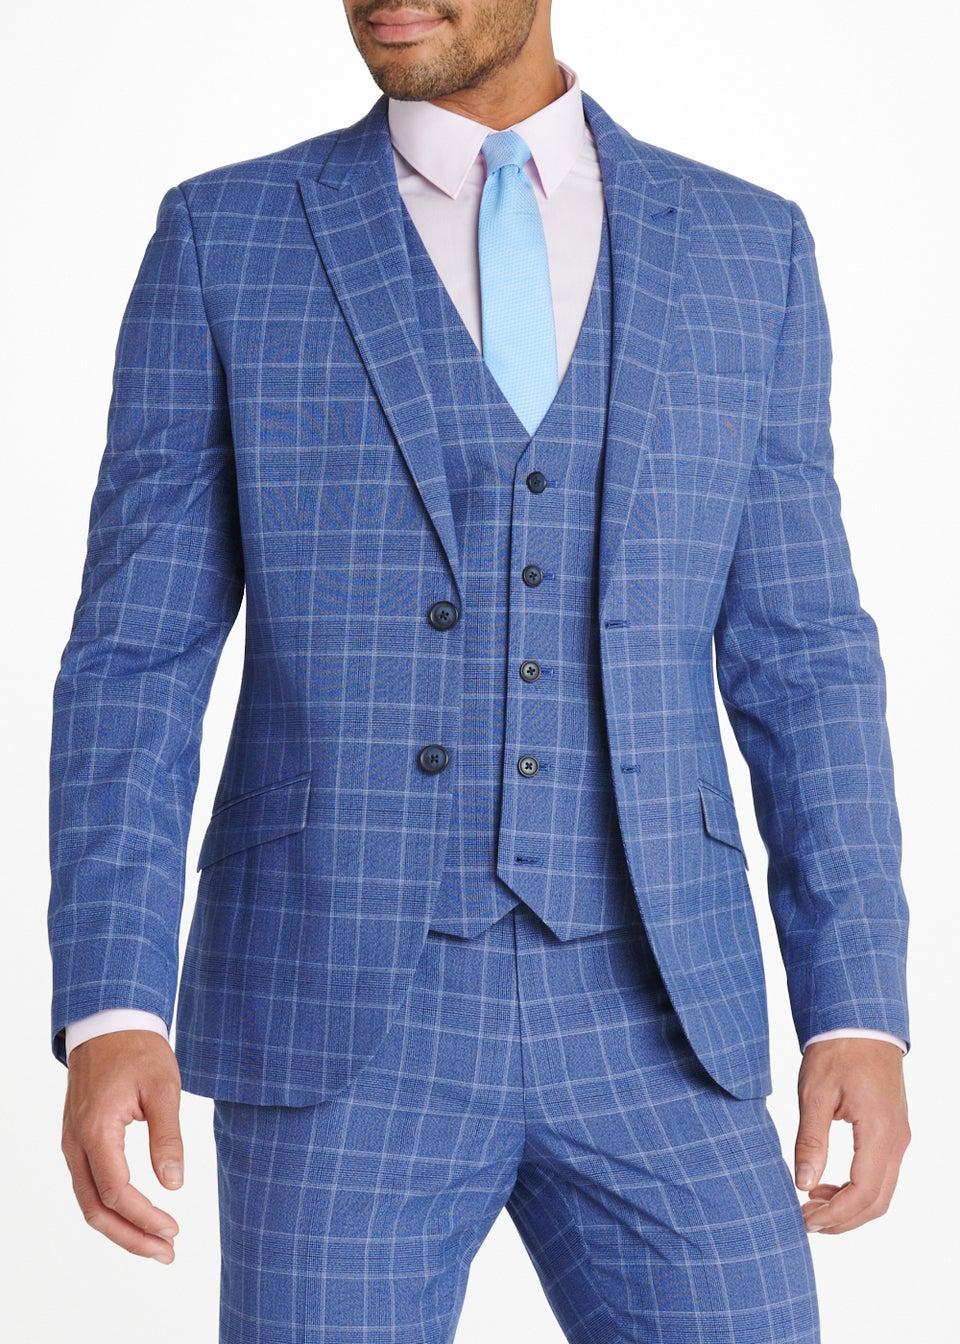 Taylor & Wright Somerset Blue Skinny Fit Suit Jacket